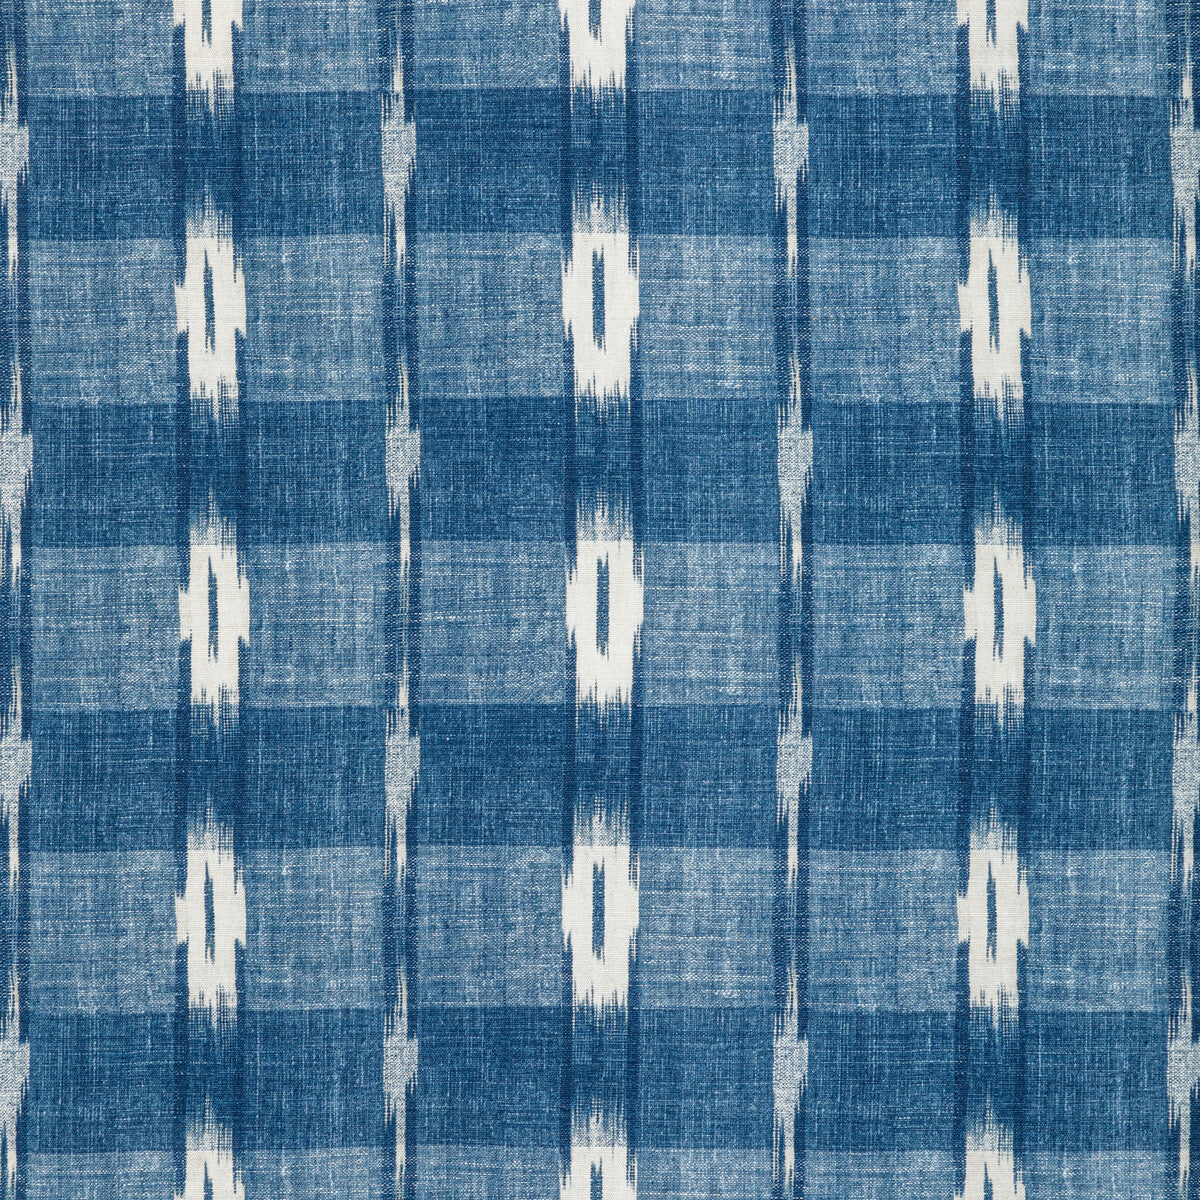 Girard Print fabric in indigo color - pattern 8022106.55.0 - by Brunschwig &amp; Fils in the Manoir collection